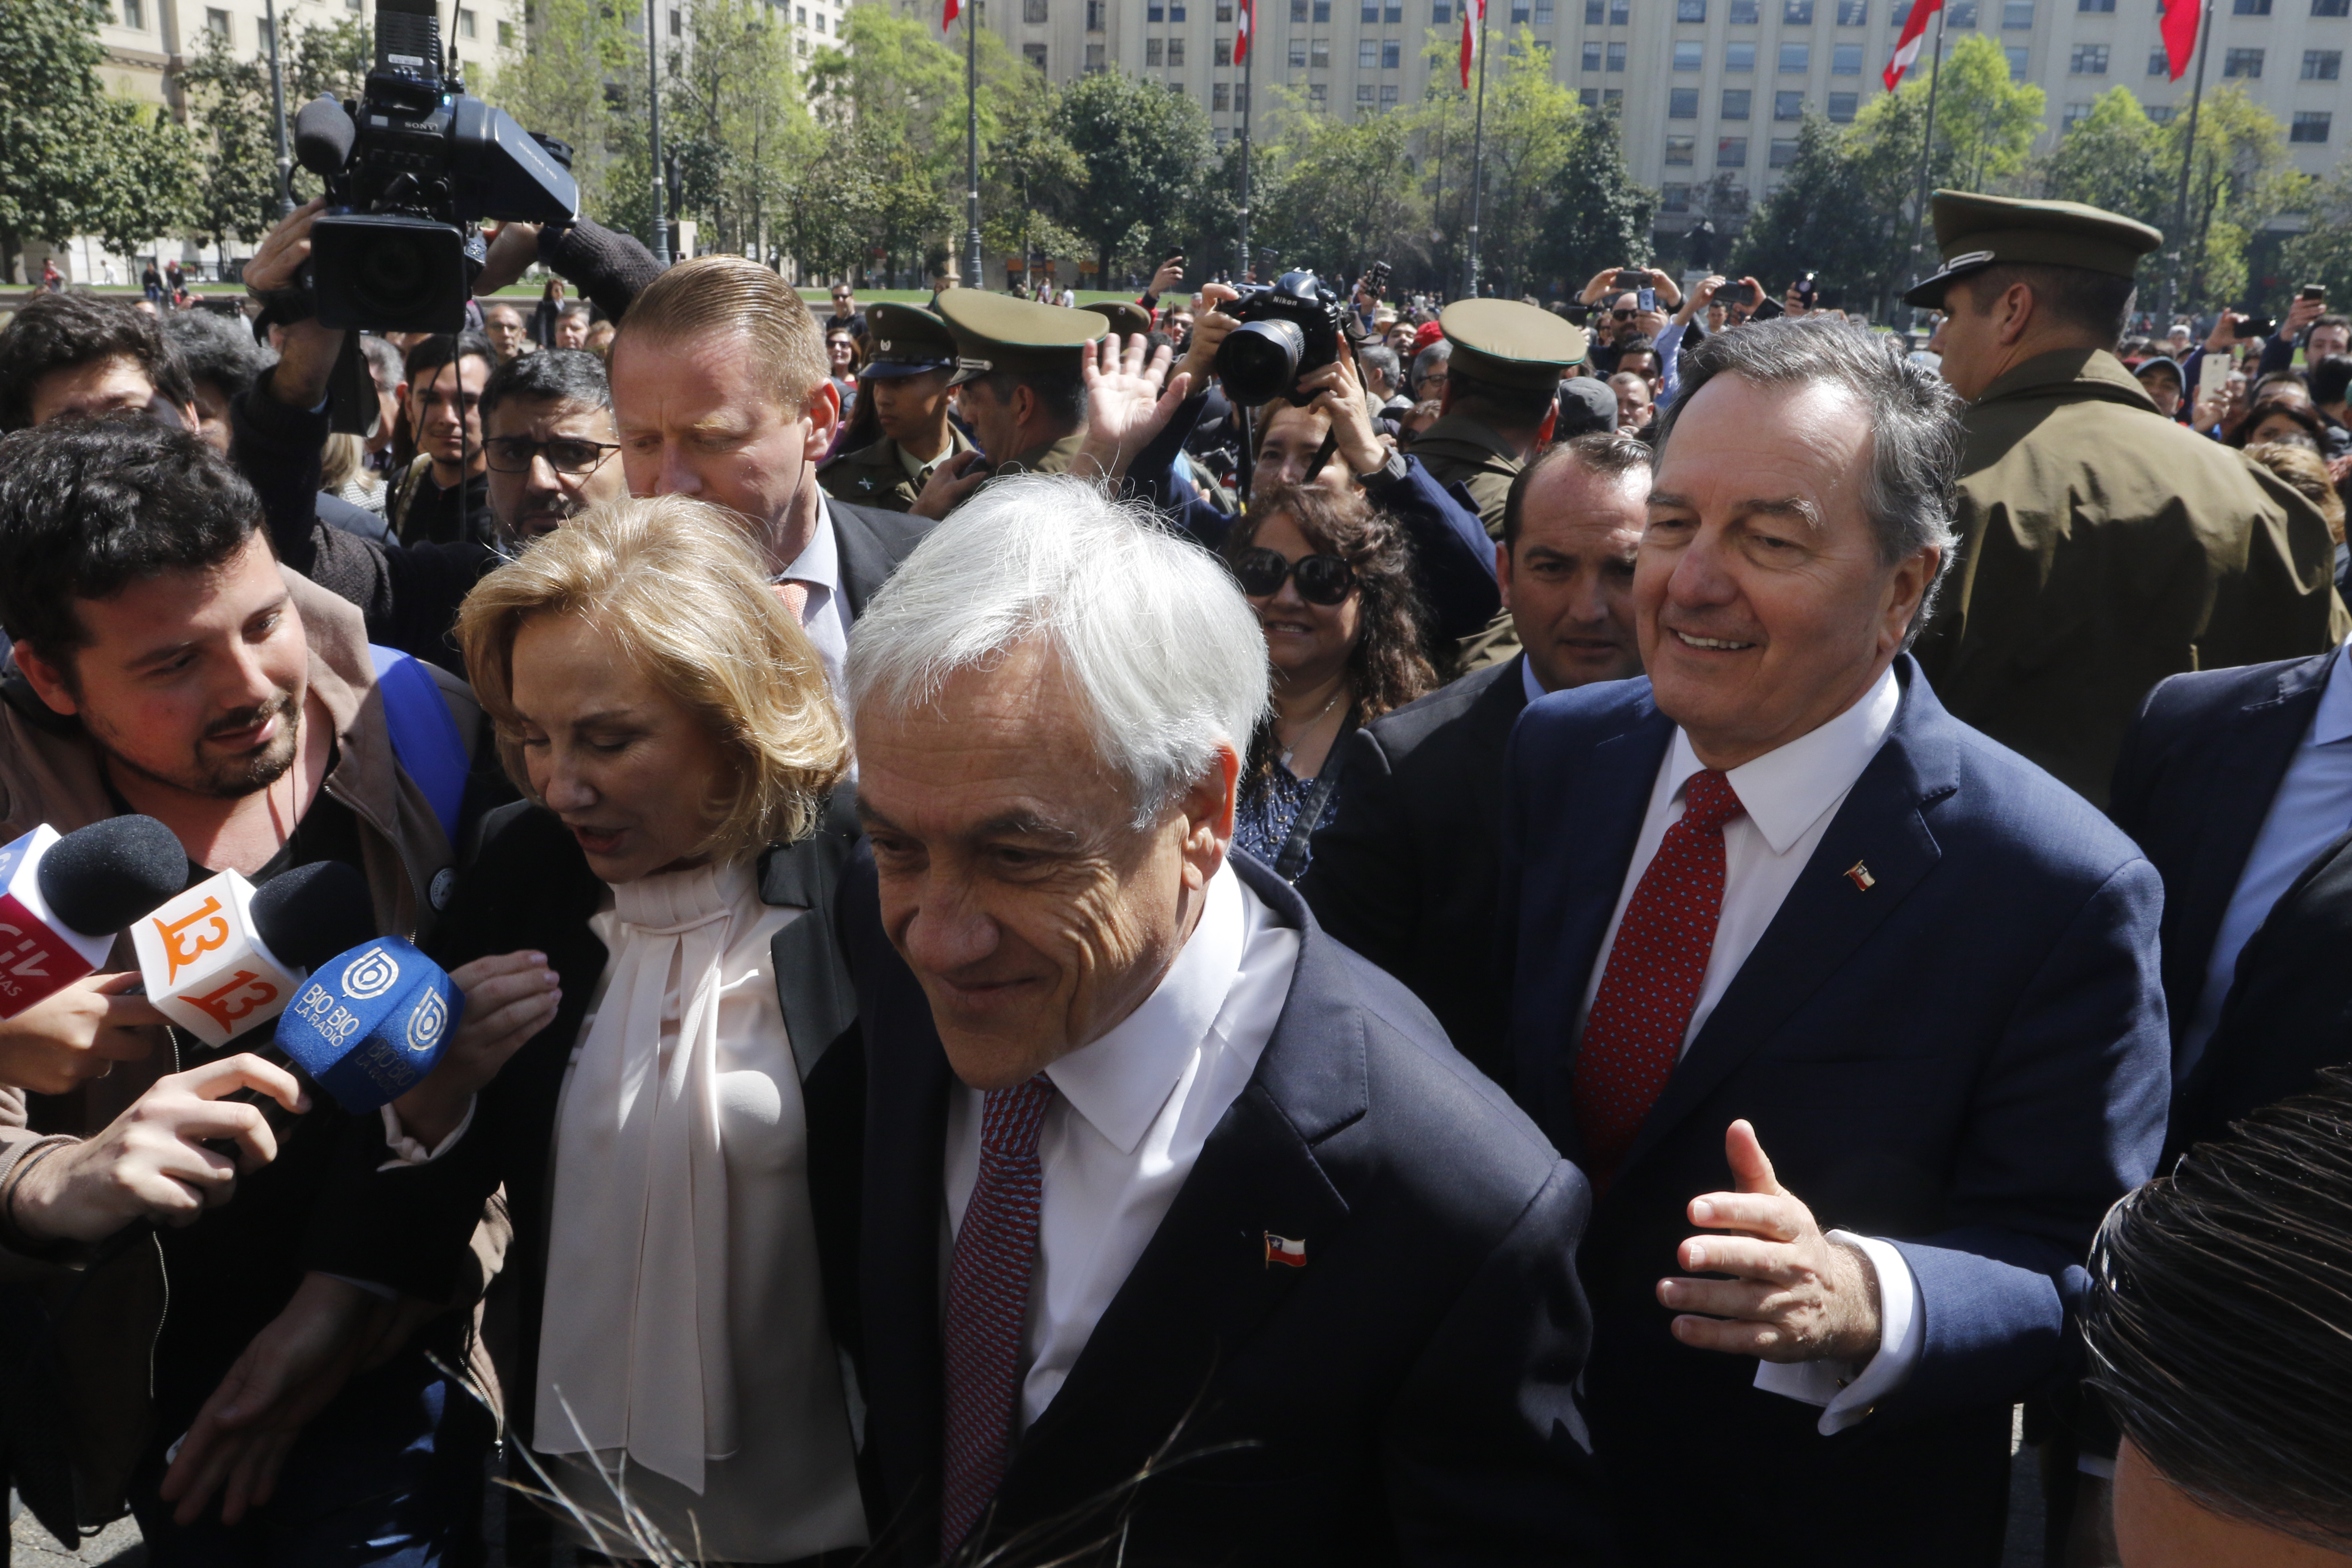 President Piñera along with the first lady, Cecilia Morel, went outside the presidential palace to celebrate with supporters. Rodrigo Saénz | Agencia UNO